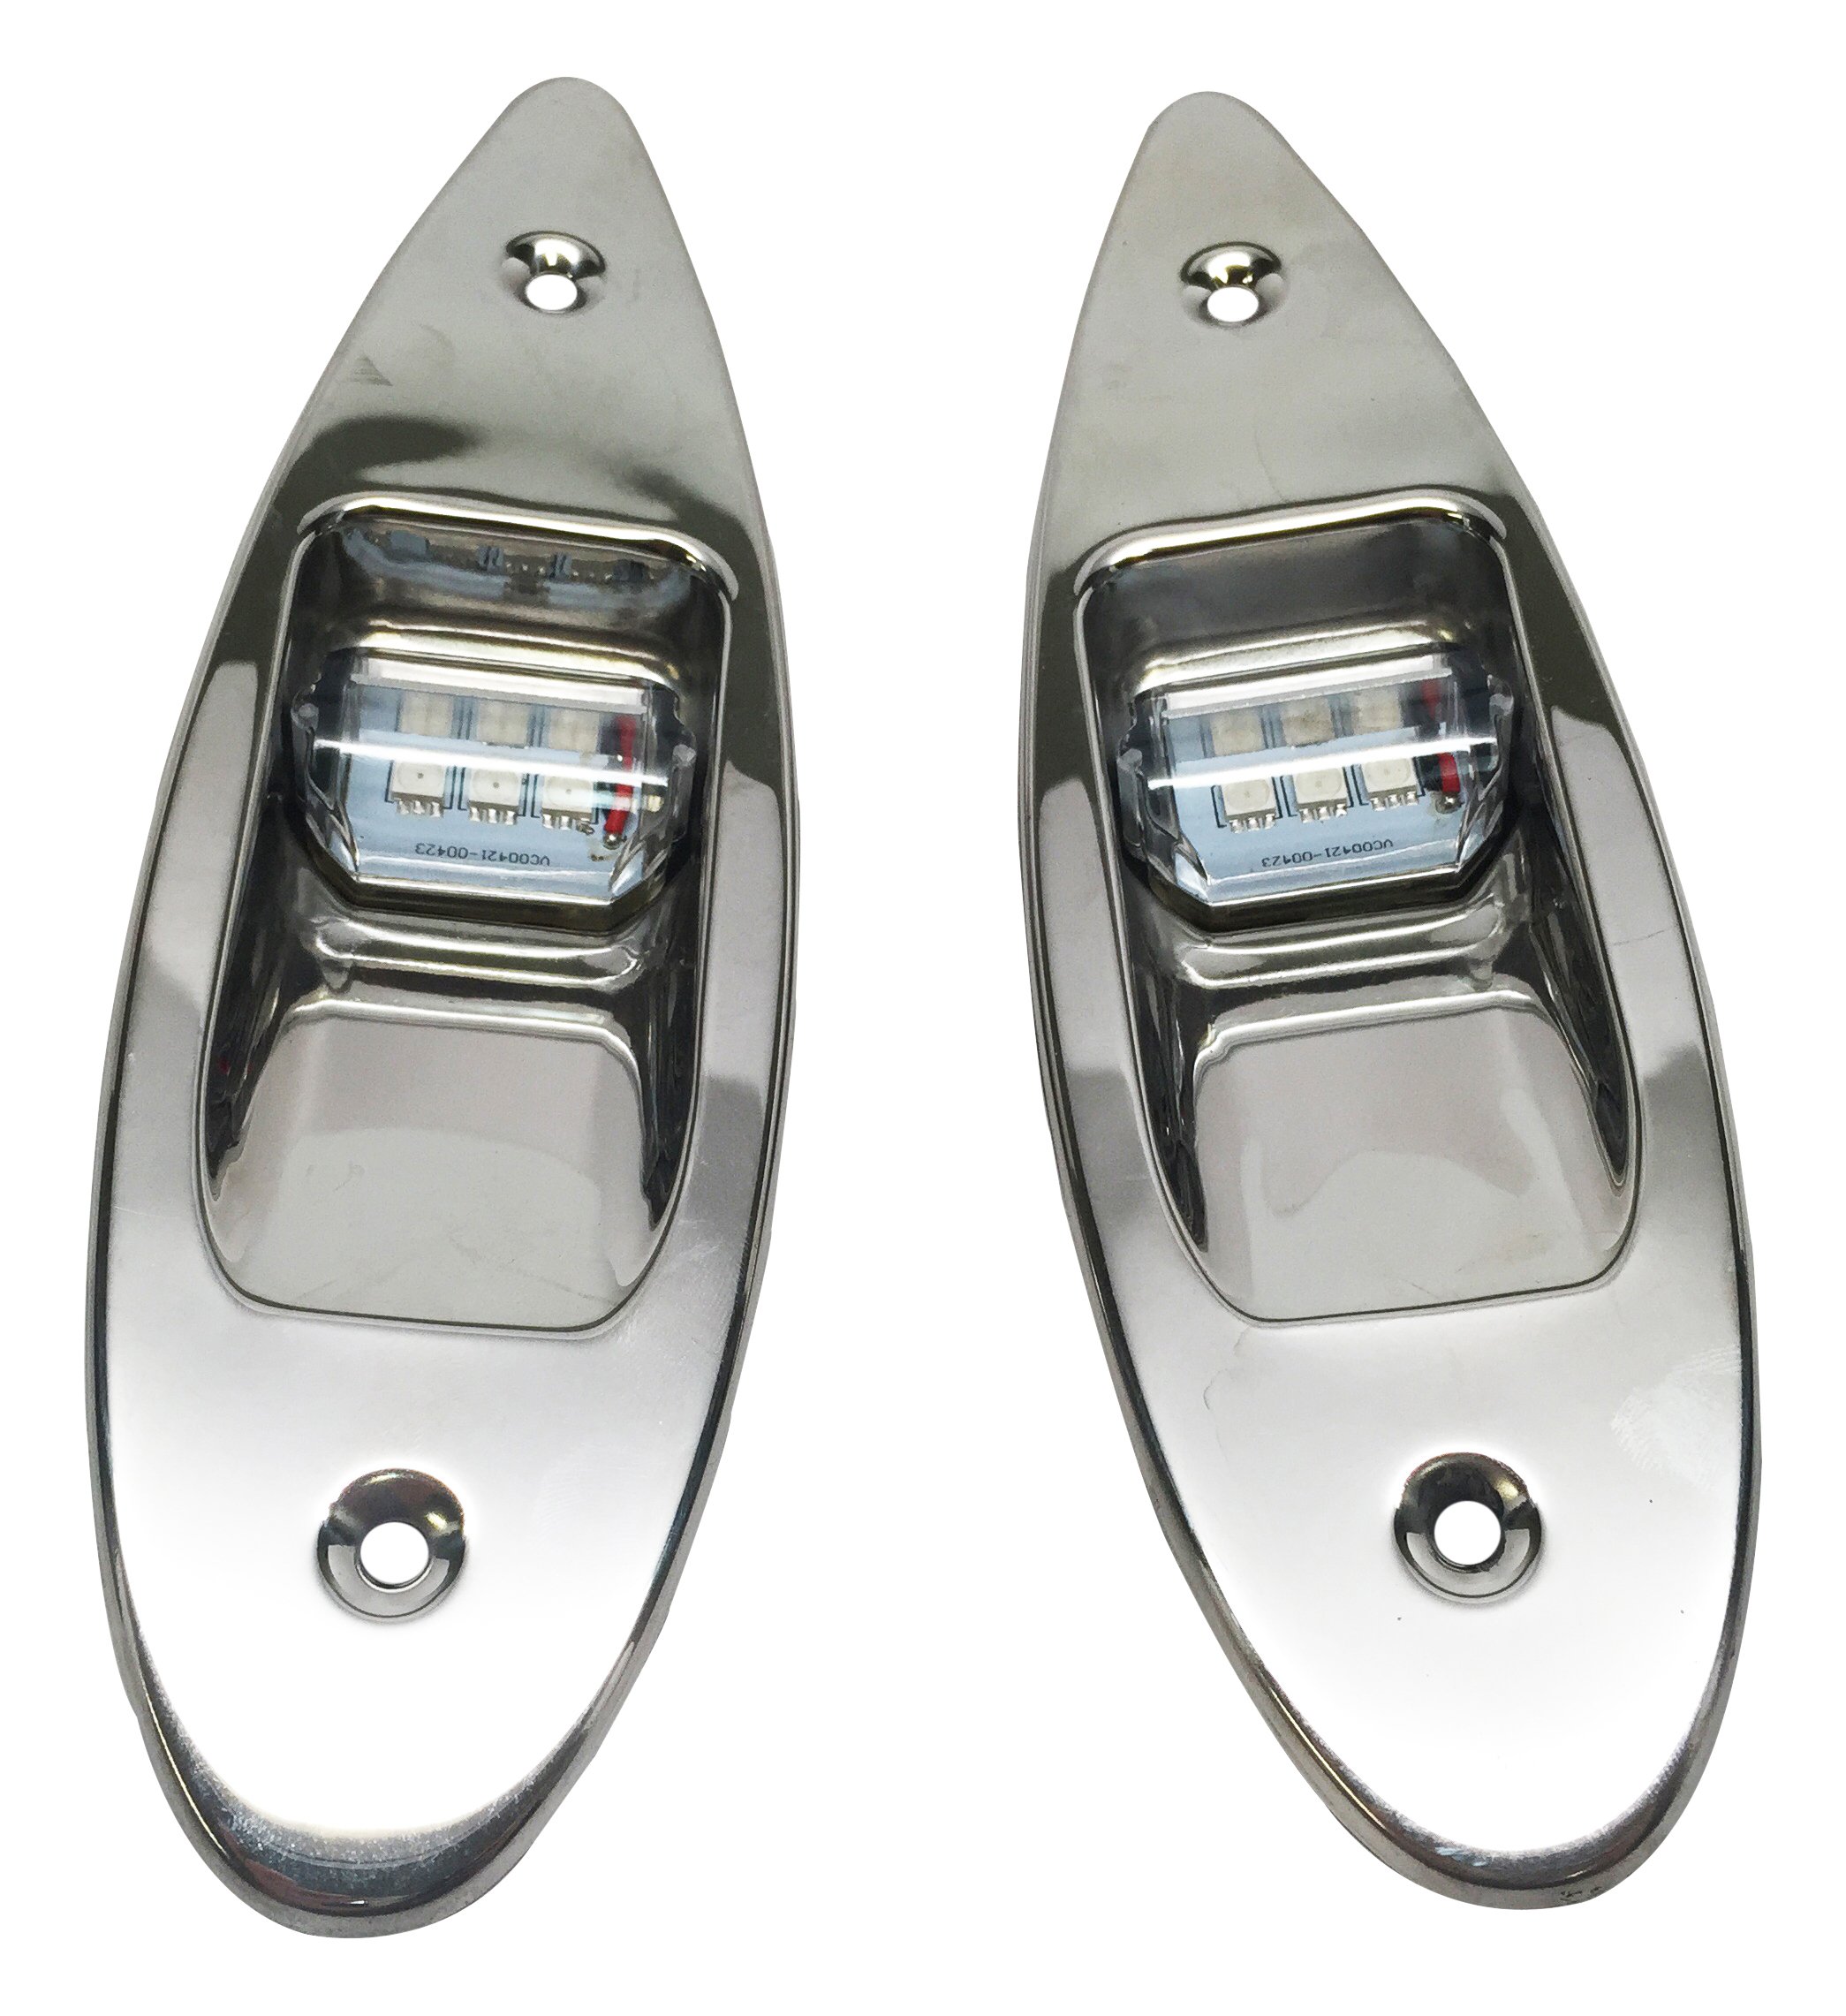 Pactrade Marine Navigation Pair of LED Side Bow Tear Drop Lights SS Vertical Mount 12V Red & Green Signal Lights for Small Boat, Pontoon.